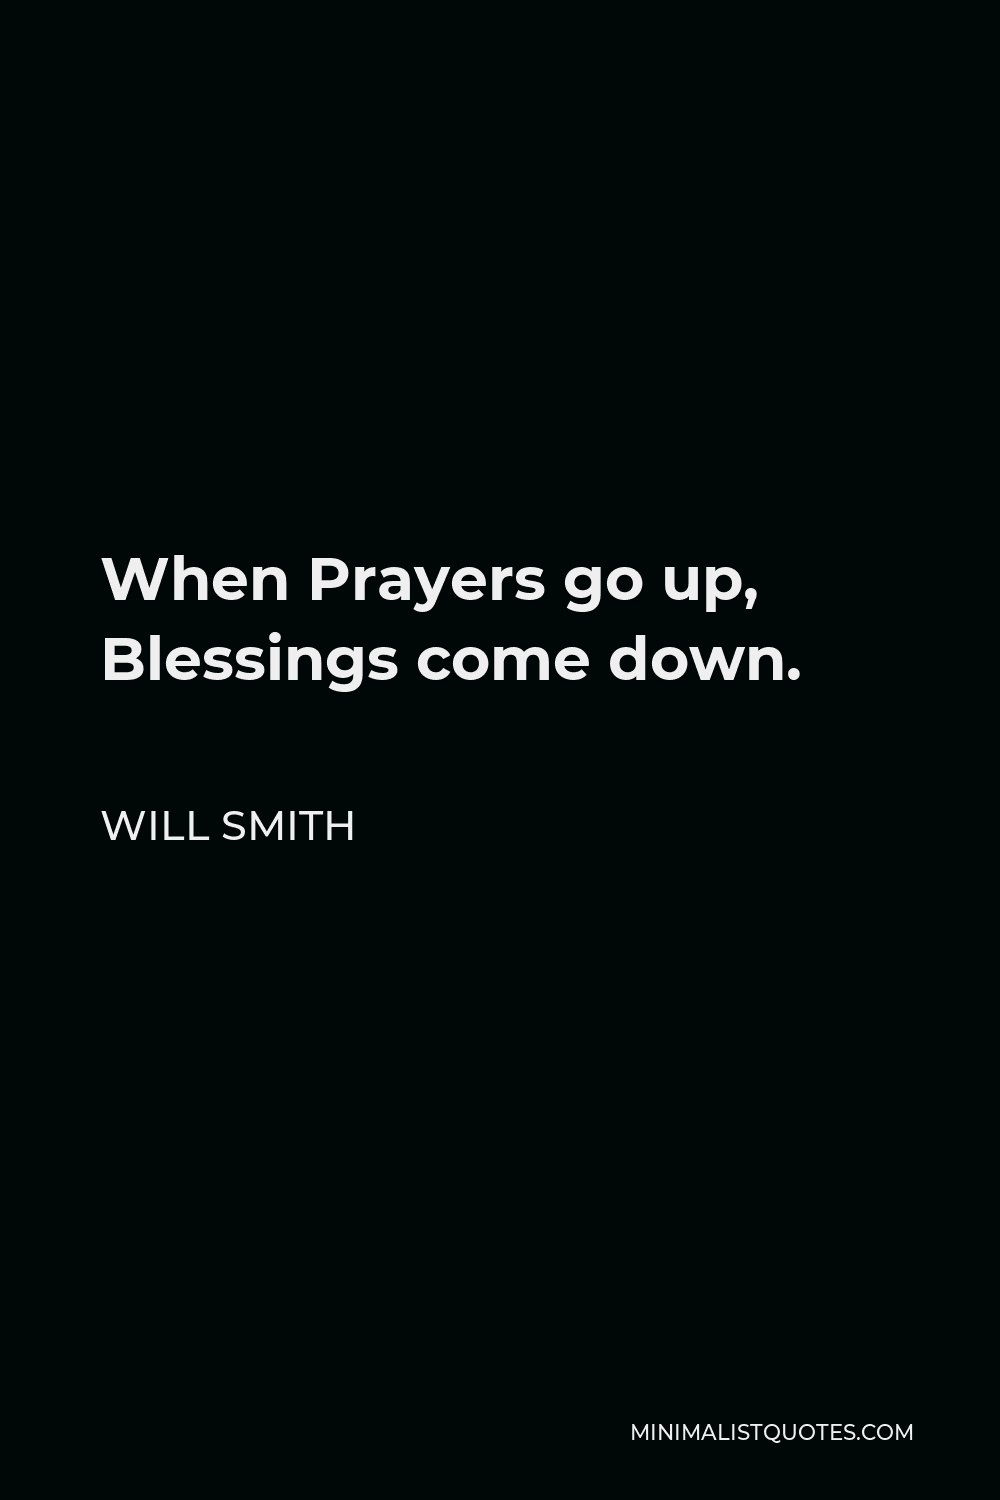 Will Smith Quote - When Prayers go up, Blessings come down.